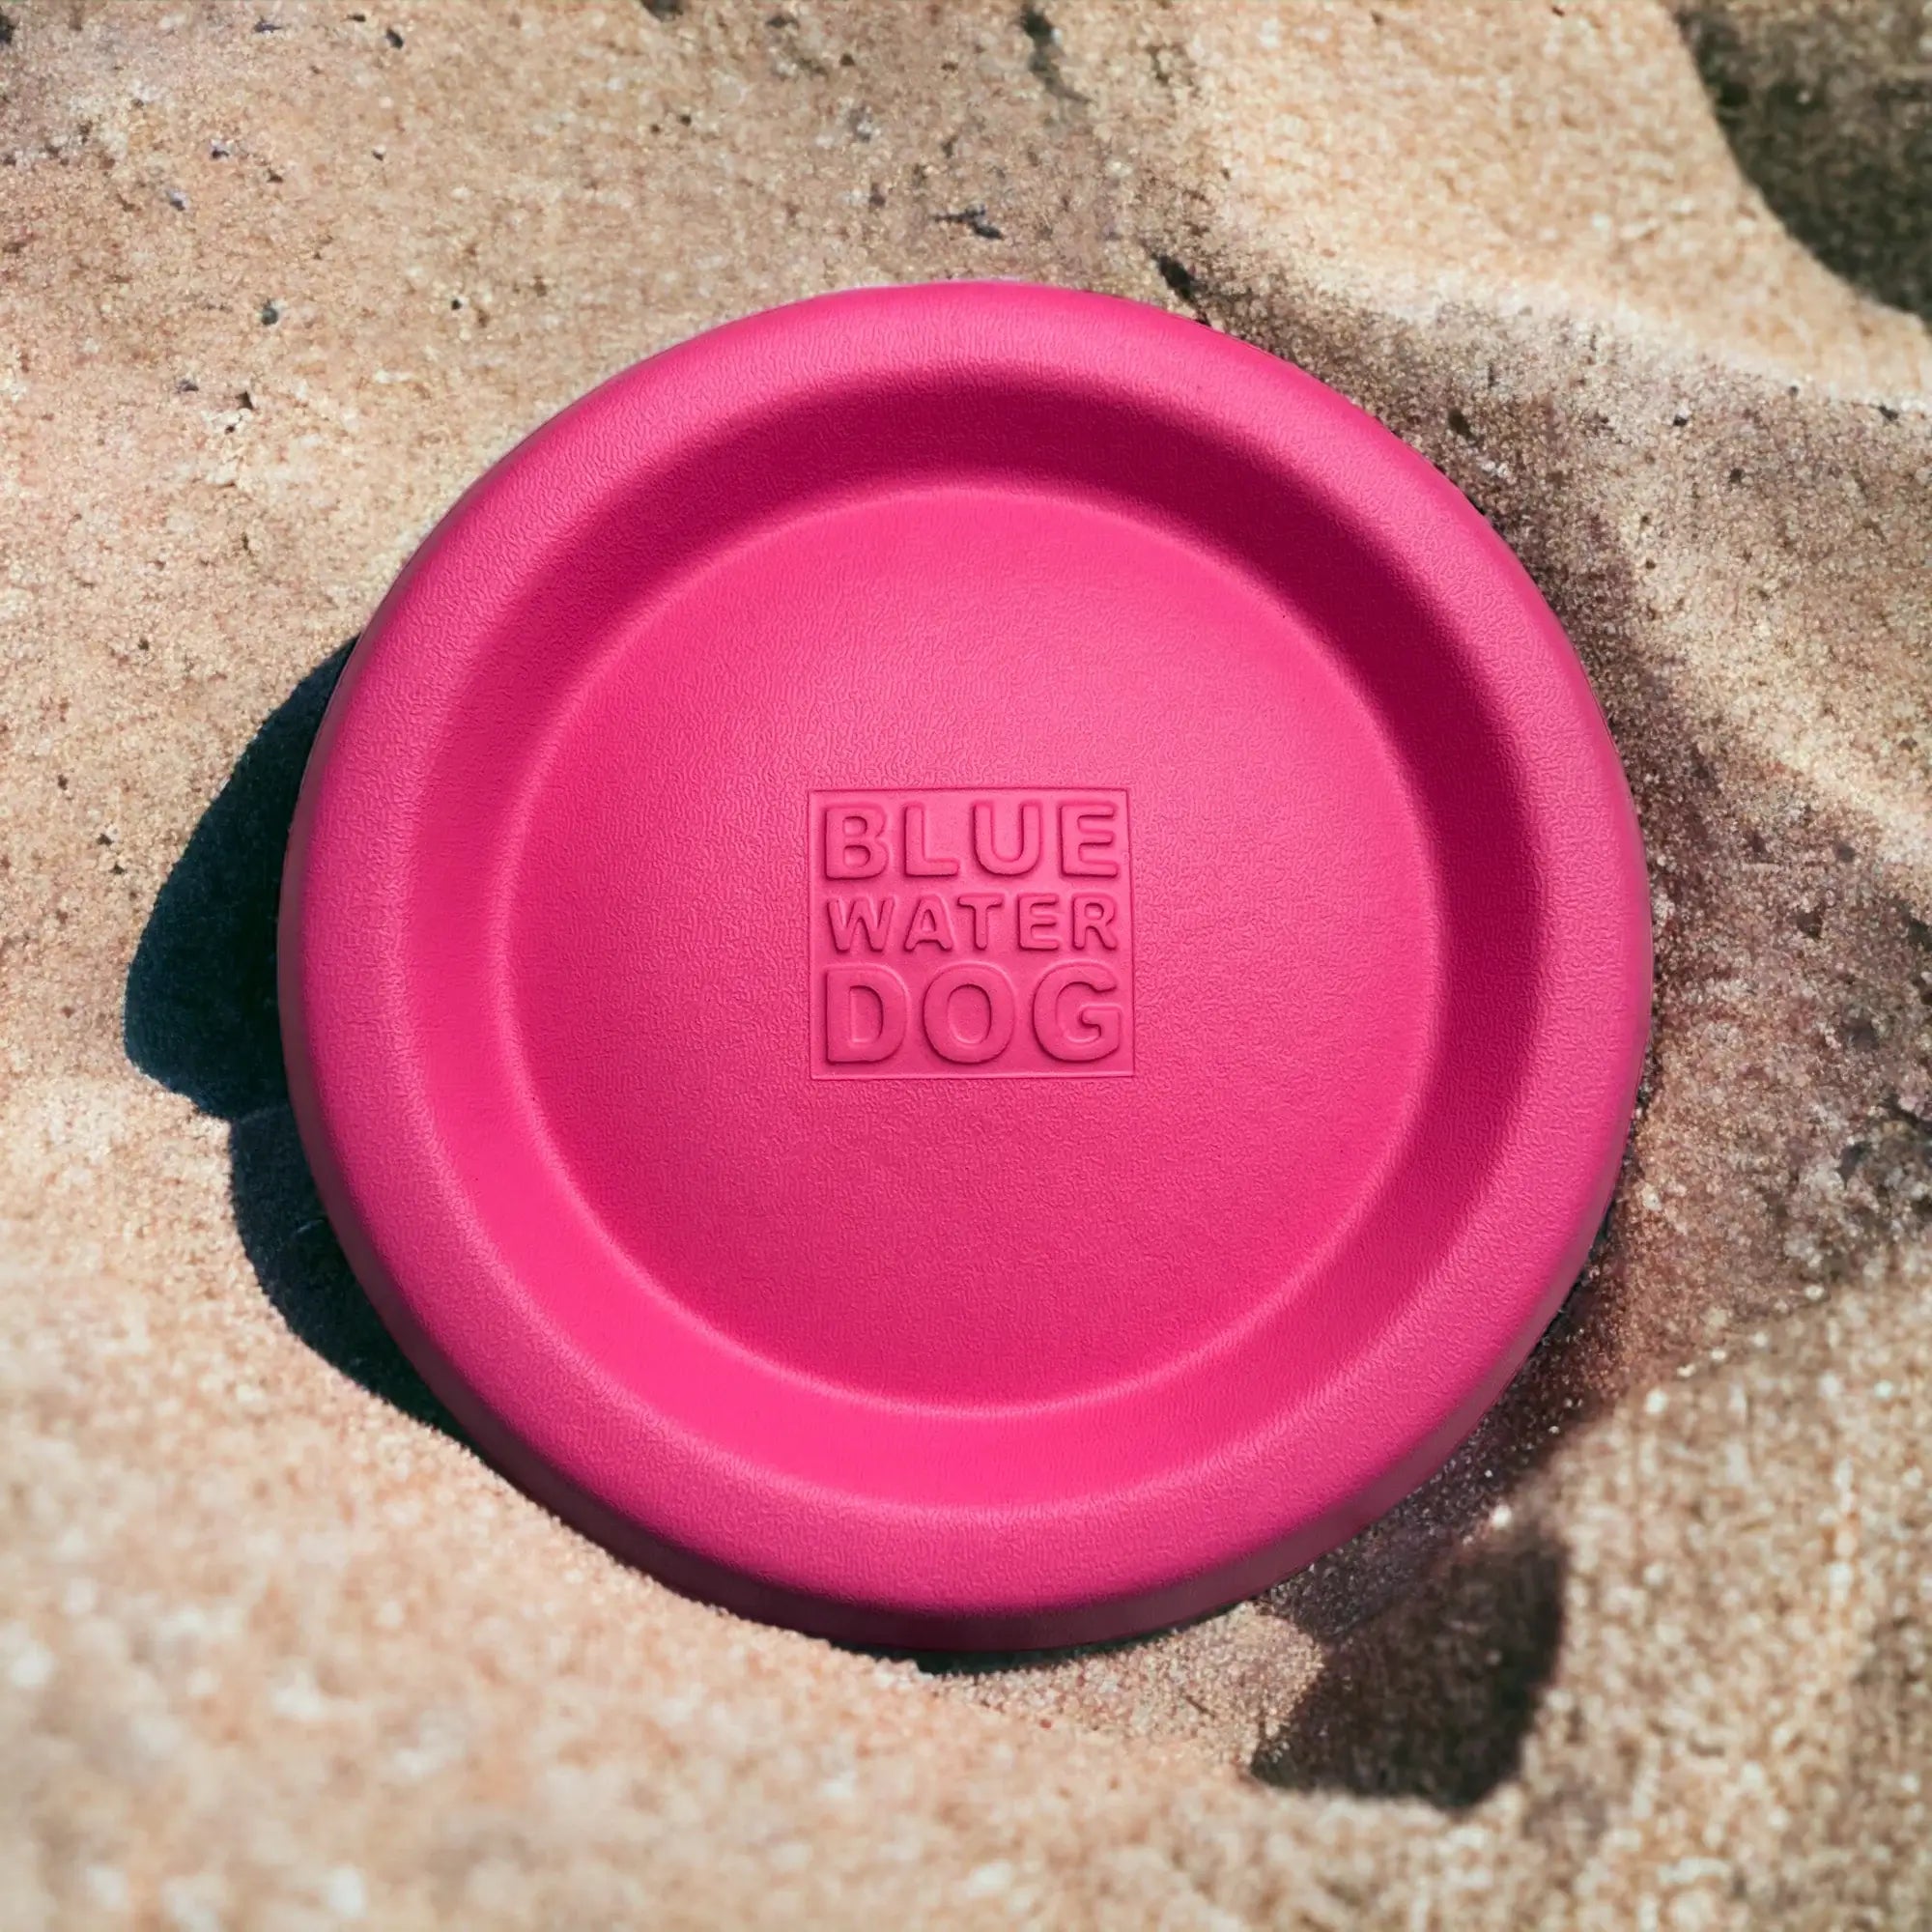 Pink dog frisbee laying in the sand.